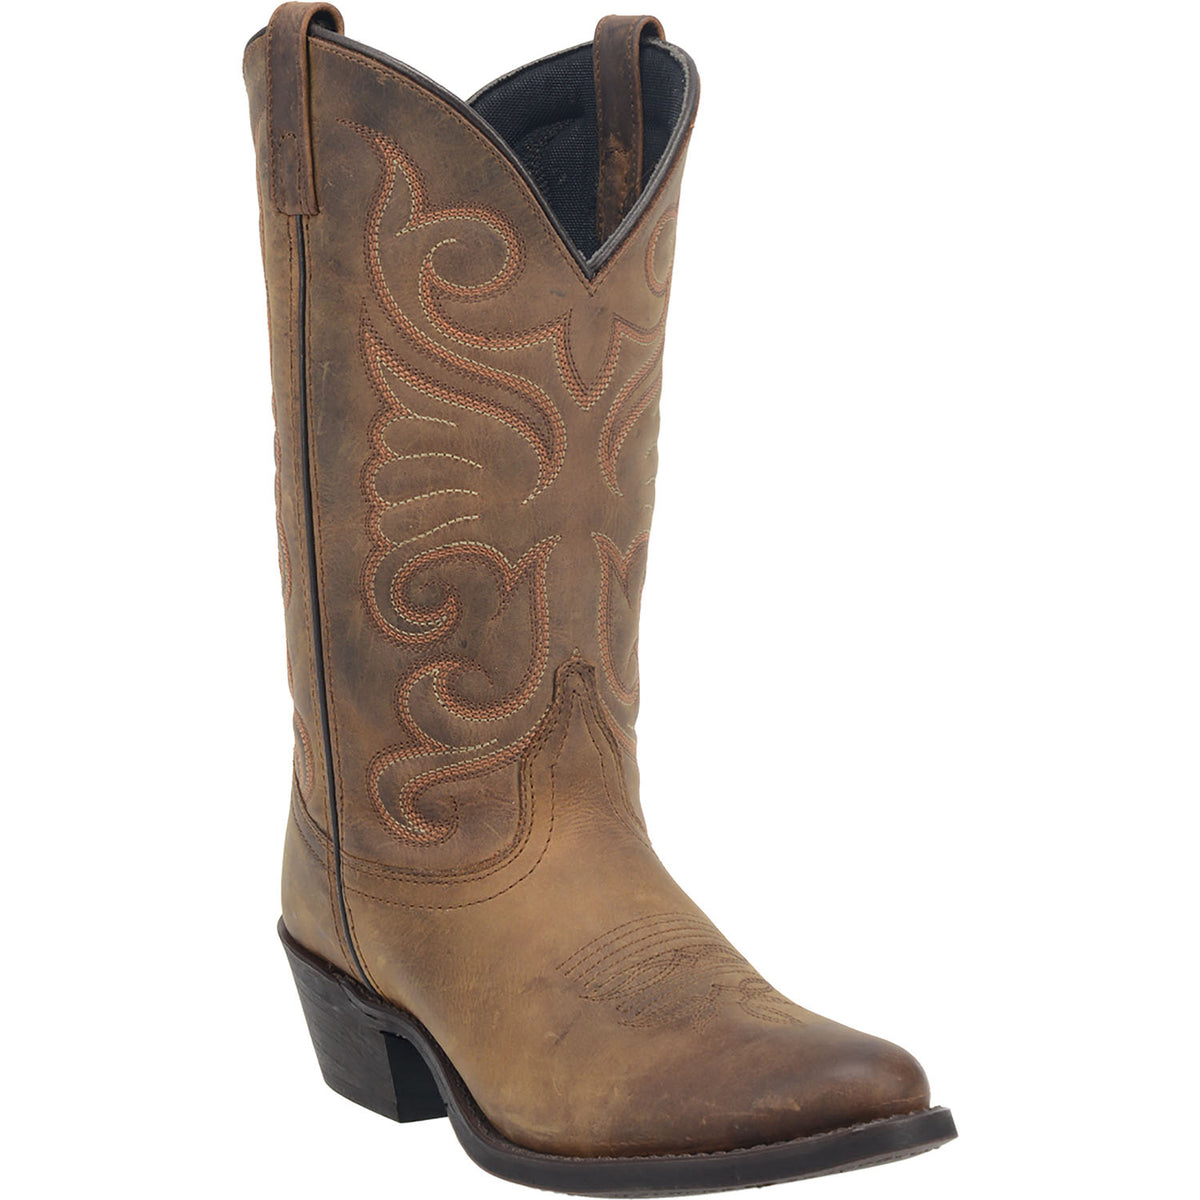 BRIDGET LEATHER BOOT Cover